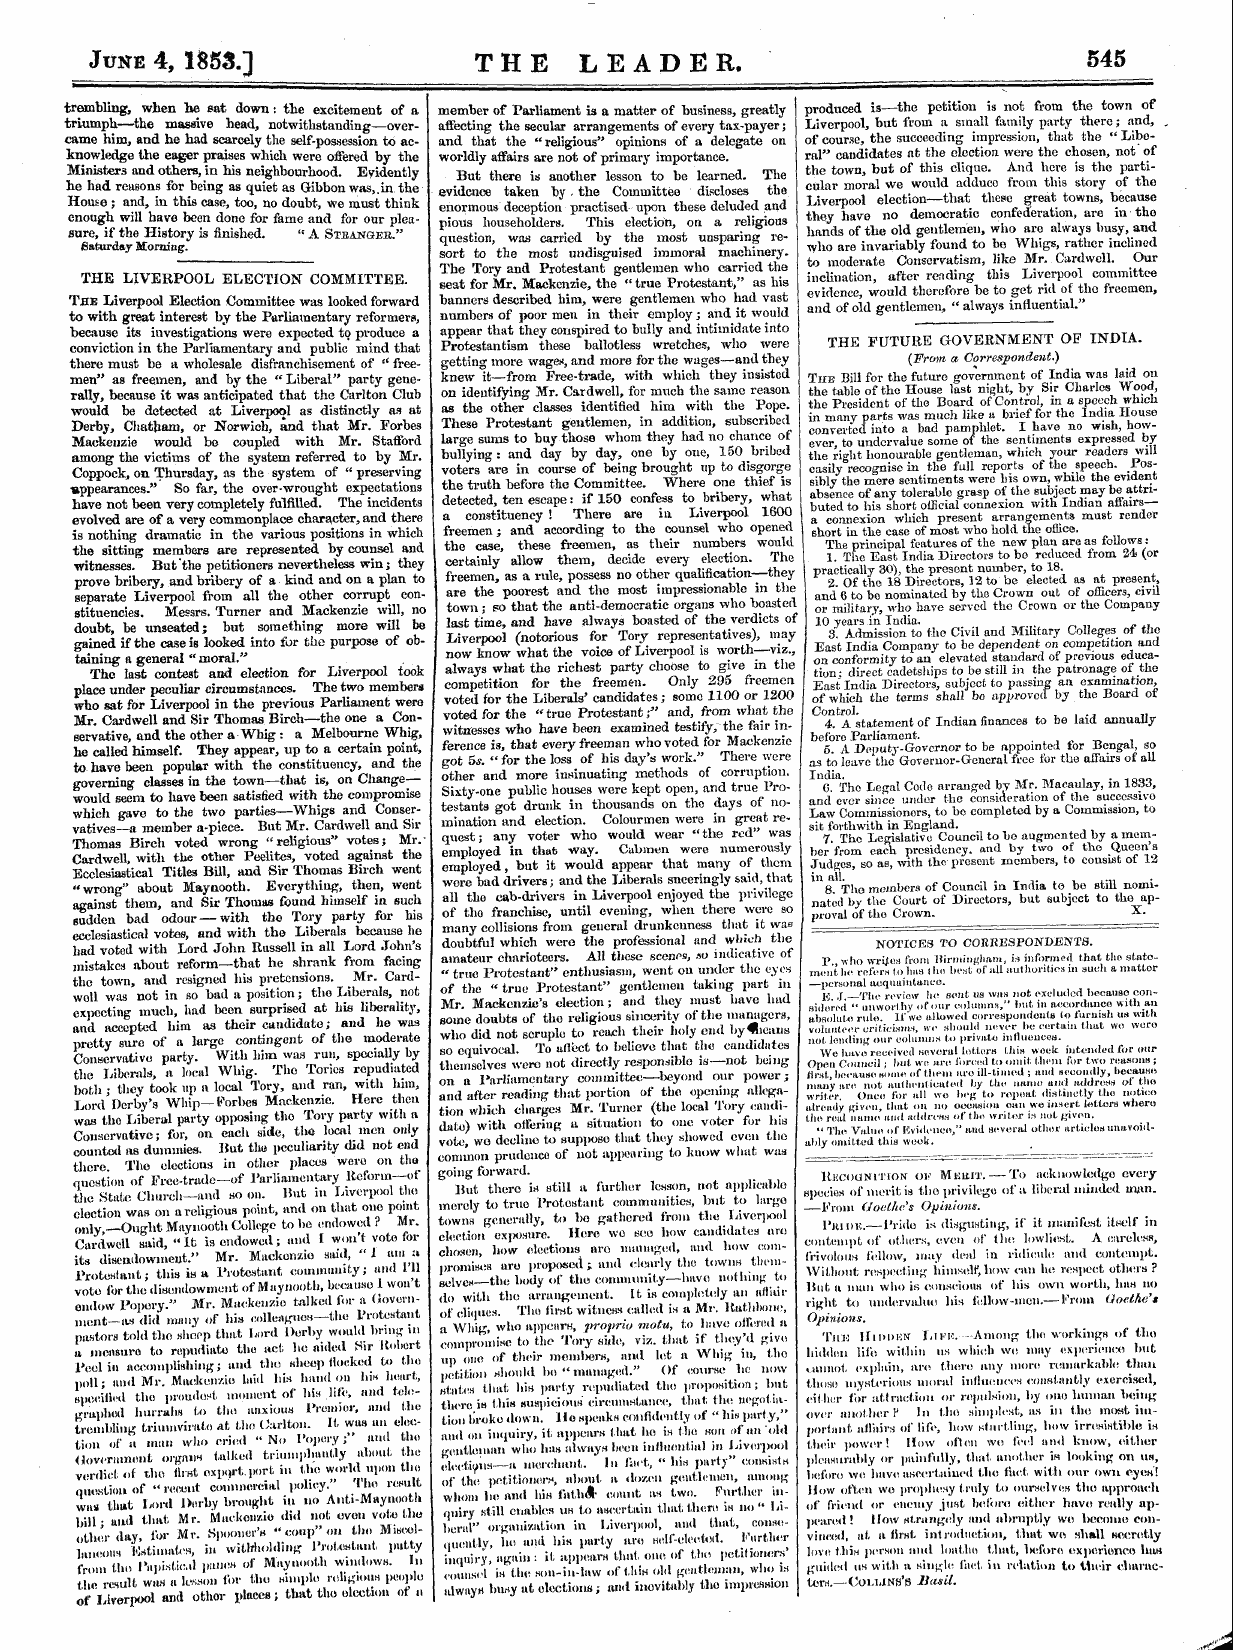 Leader (1850-1860): jS F Y, 1st edition: 17